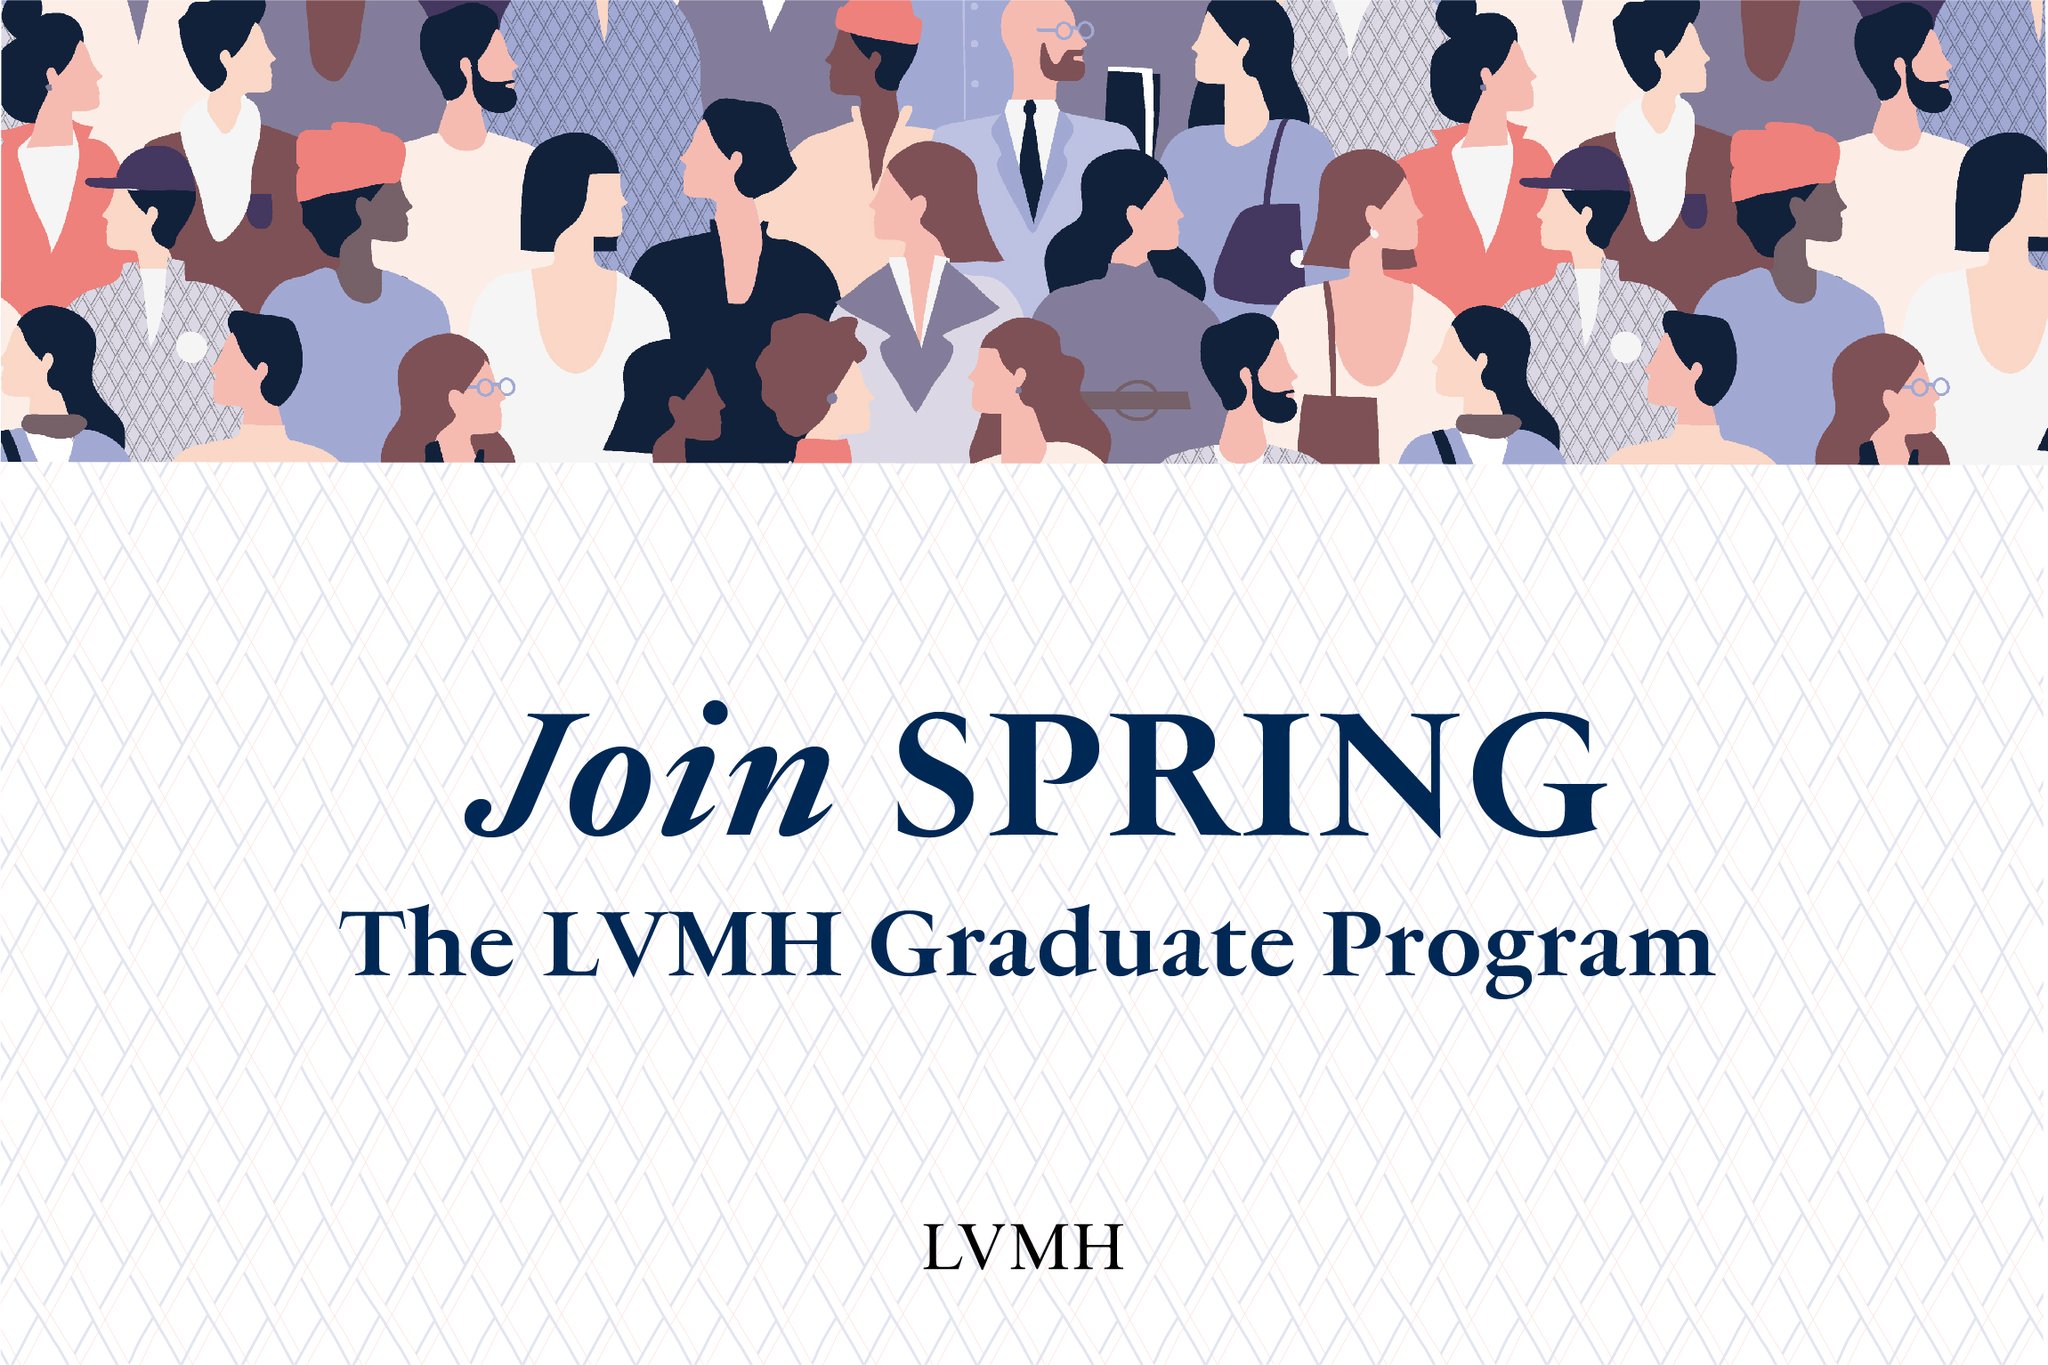 Launch your HR career with@lvmh SPRING Human Resources Graduate